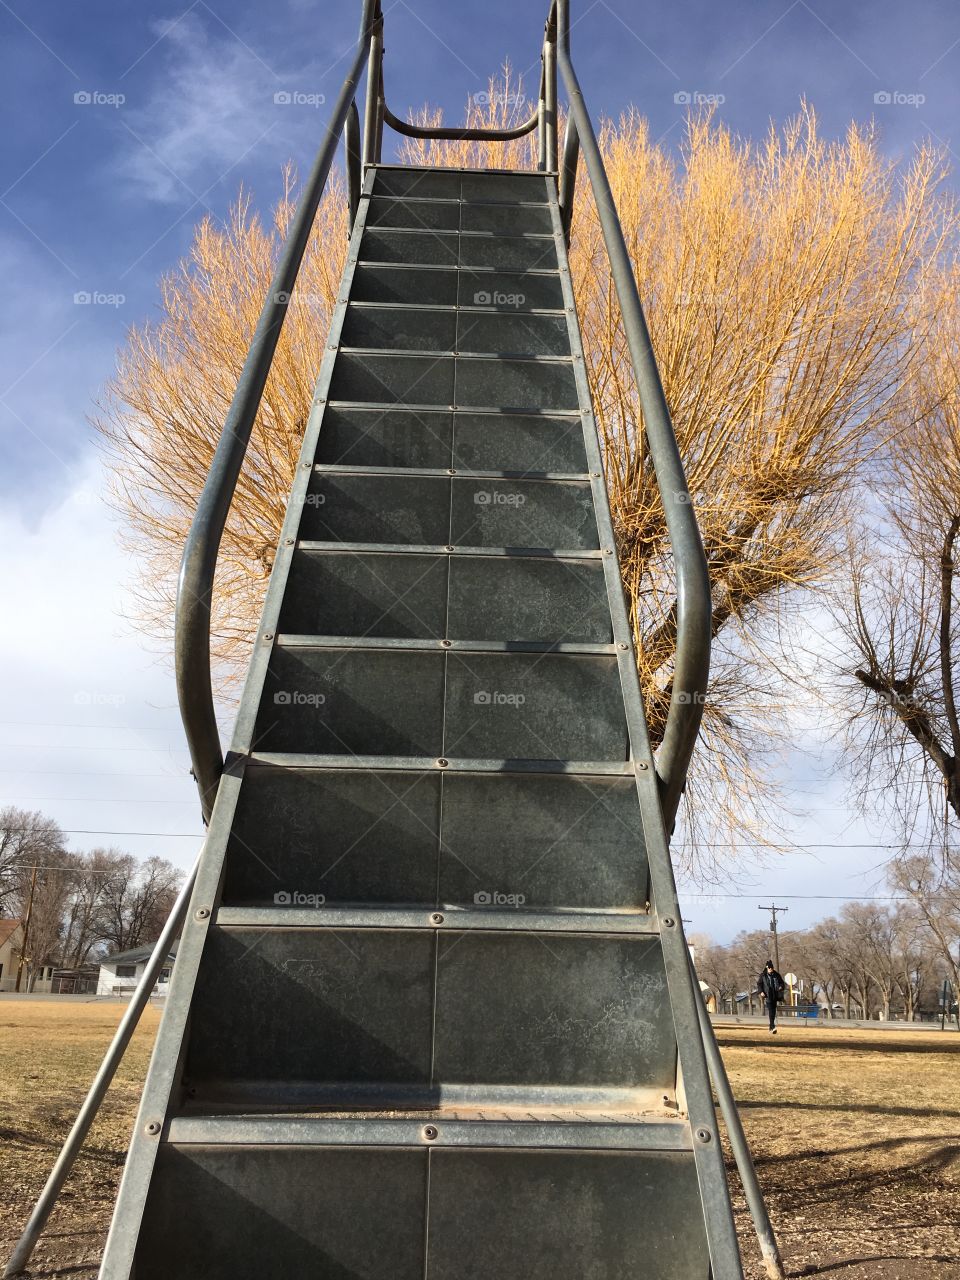 Old Metal Slide at the Playground. 